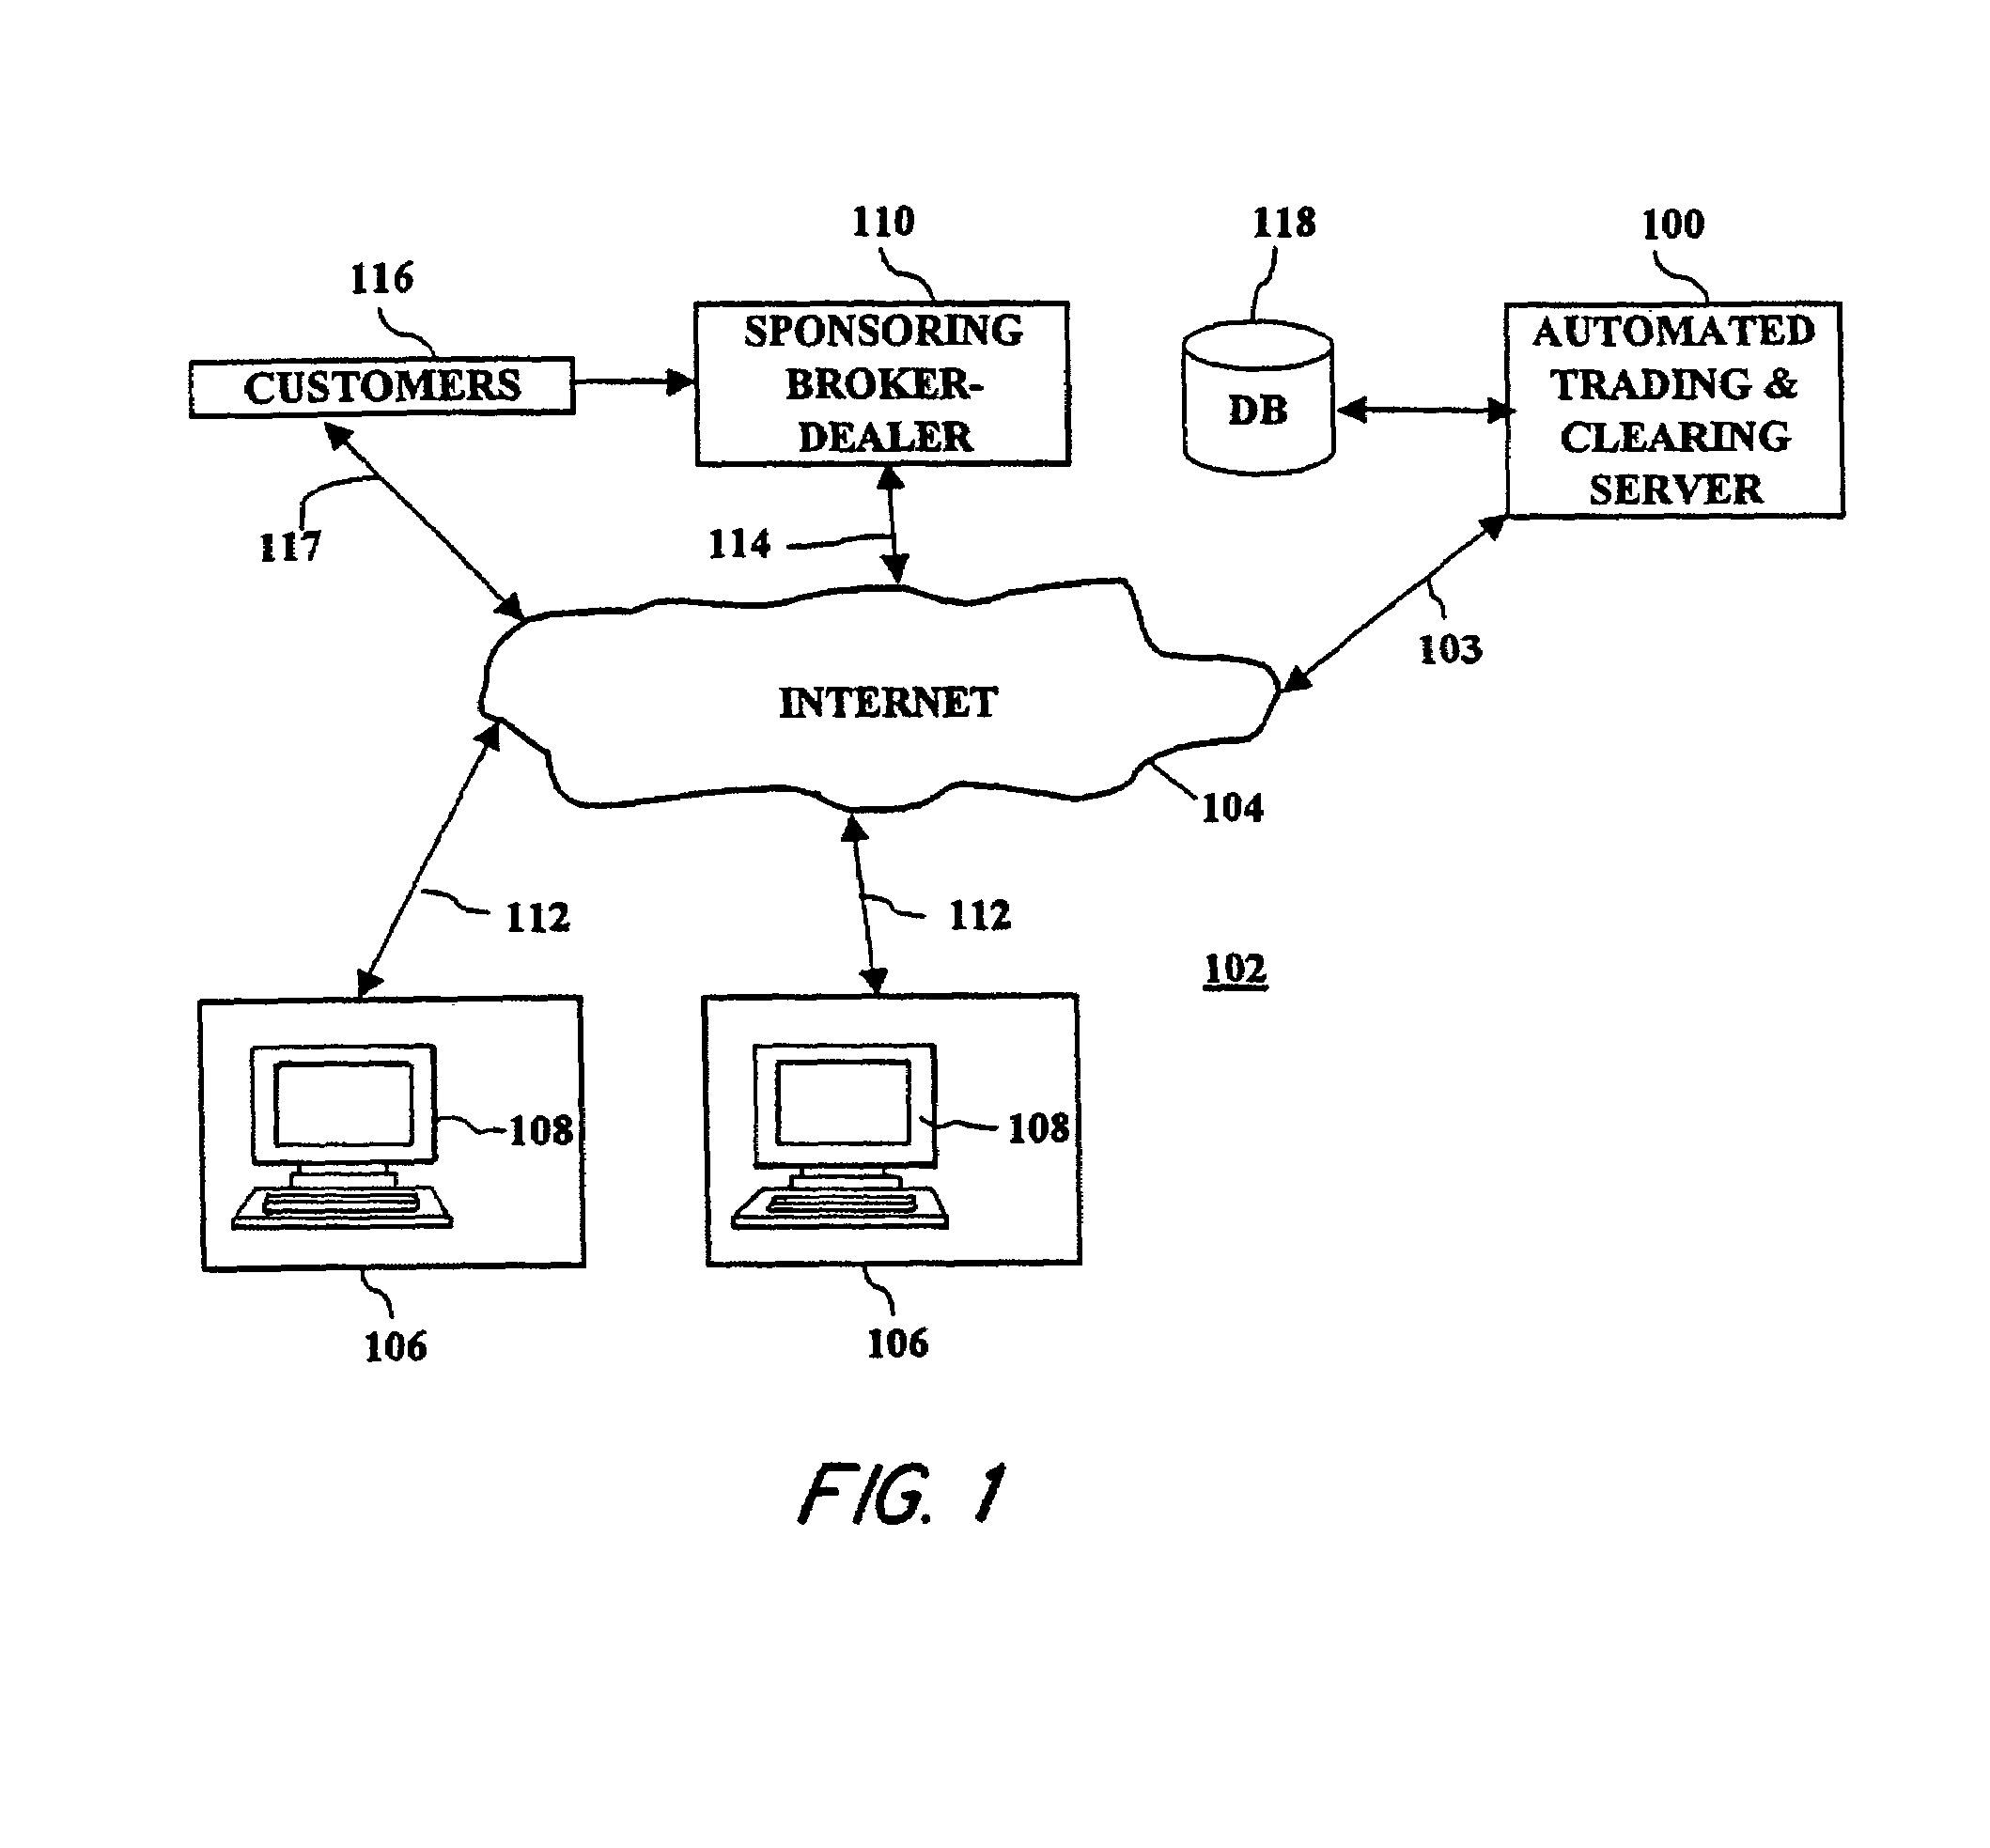 Network-based trading system and method